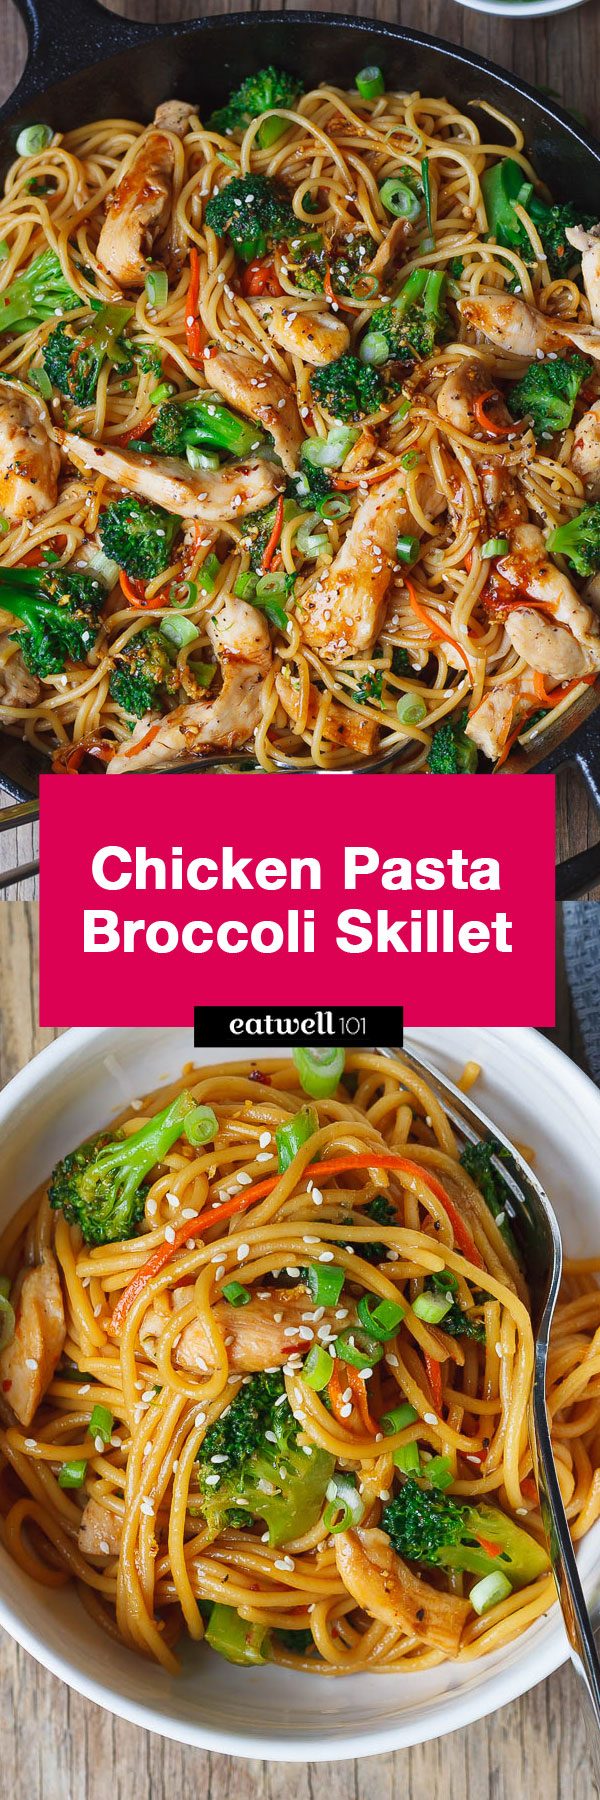 15-Minute Chicken Stir Fry Noodles – #pasta #noodle #chicken #stirfry #eatwell101 #recipe Flavor overload! Make your own take-out at home with this super easy #chicken# recipe.